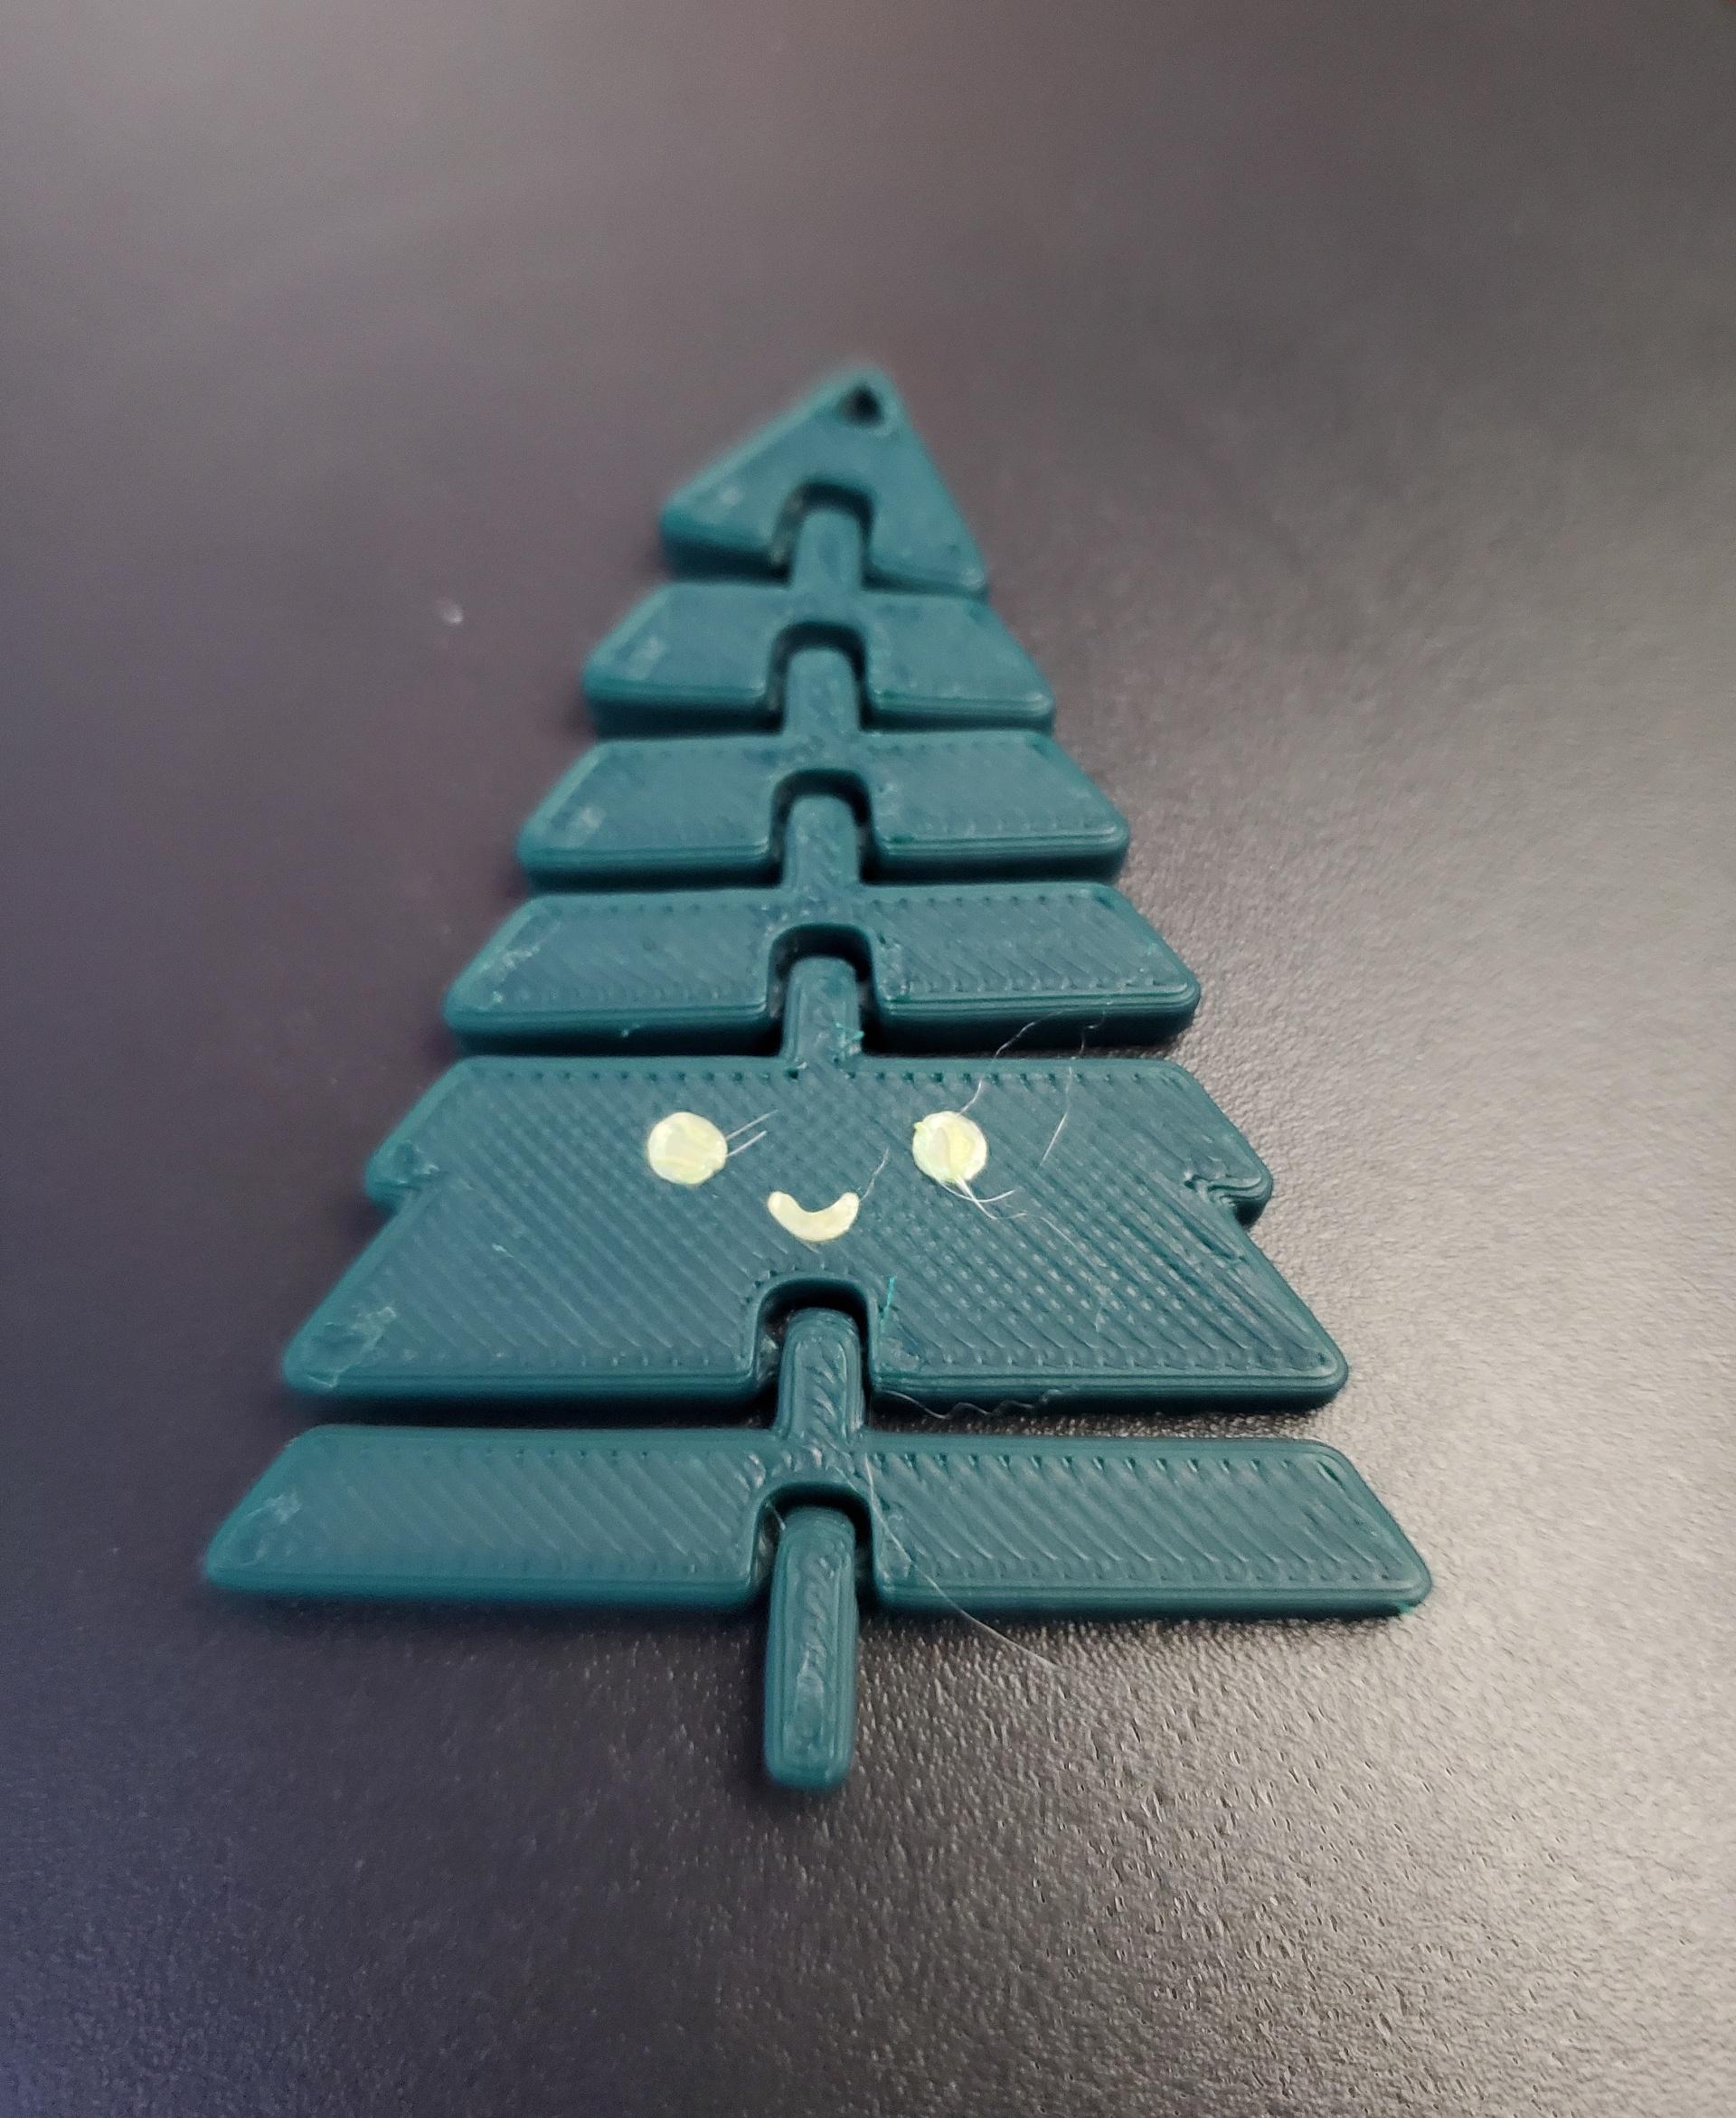 Articulated Kawaii Christmas Tree Keychain - Print in place fidget toy - 3mf - polymaker pla pro blue-green - 3d model